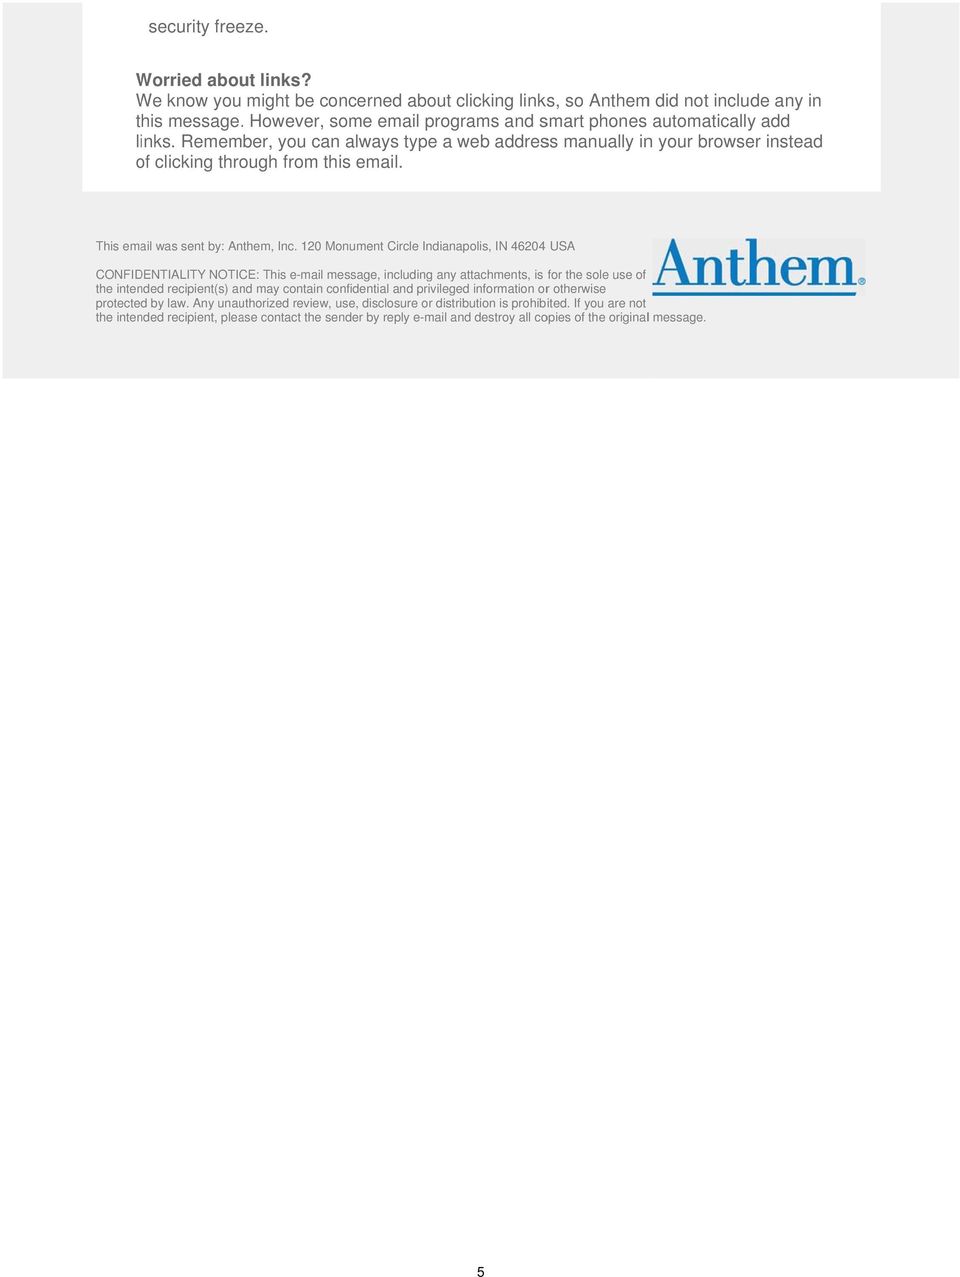 This email was sent by: Anthem, Inc.